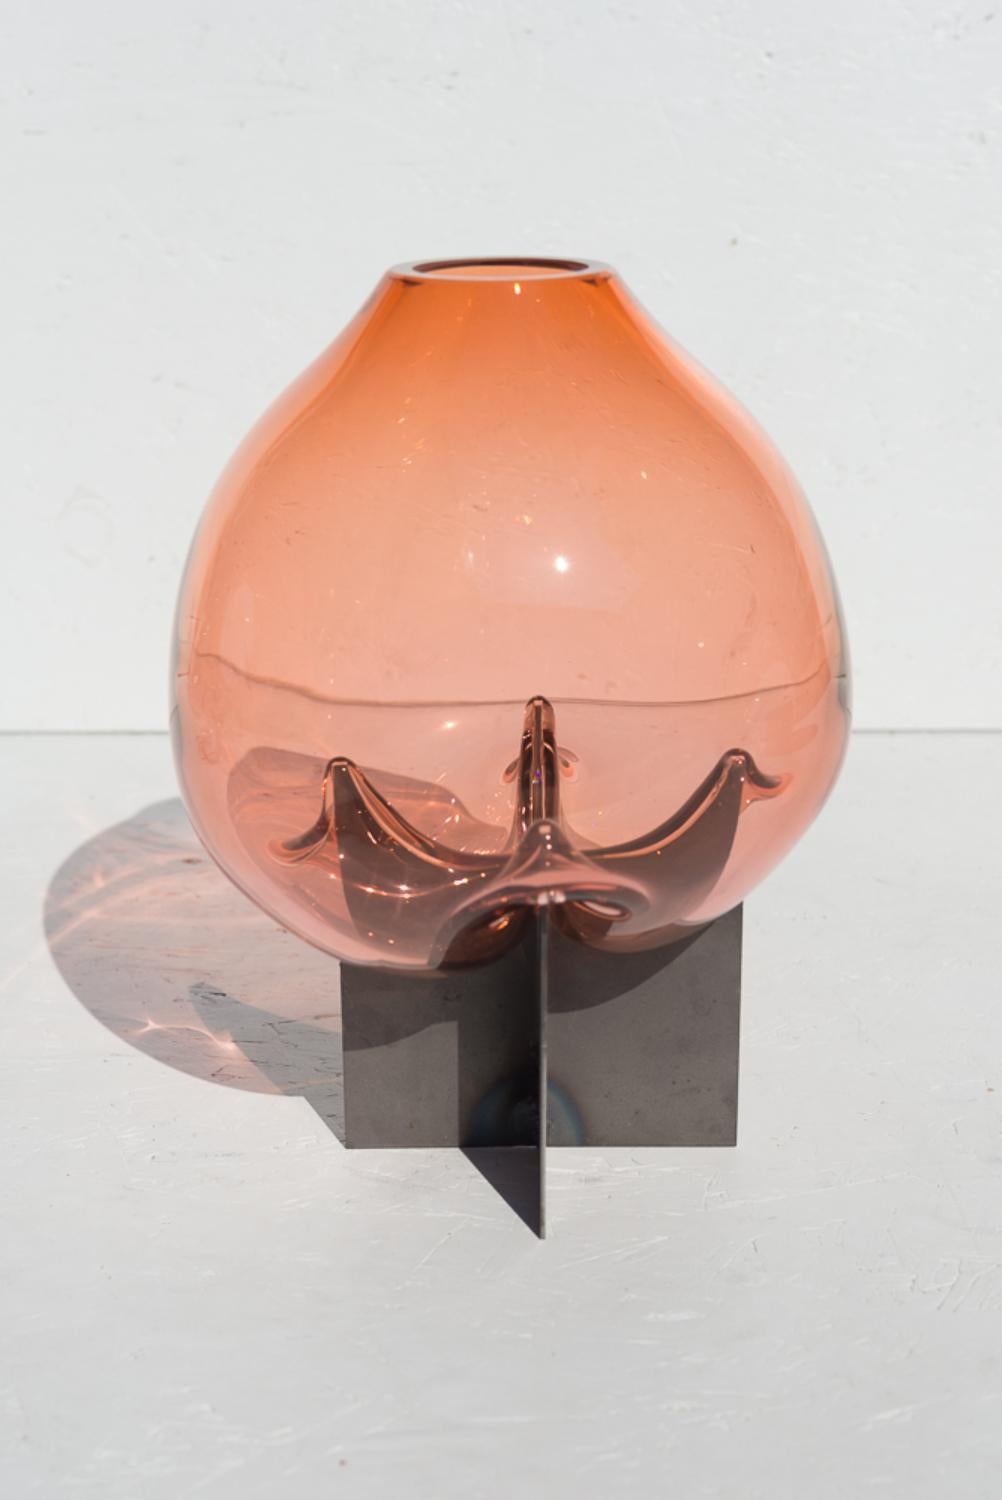 Set of 4 pink pierced table vase by Studio Thier & van Daalen
Dimensions: W 35 x D 25 x H 25cm
Materials: Steel, Glass

The studio was keen to find a way to display the fluidity of glass. Therefore they sought the contrast between the Industrial